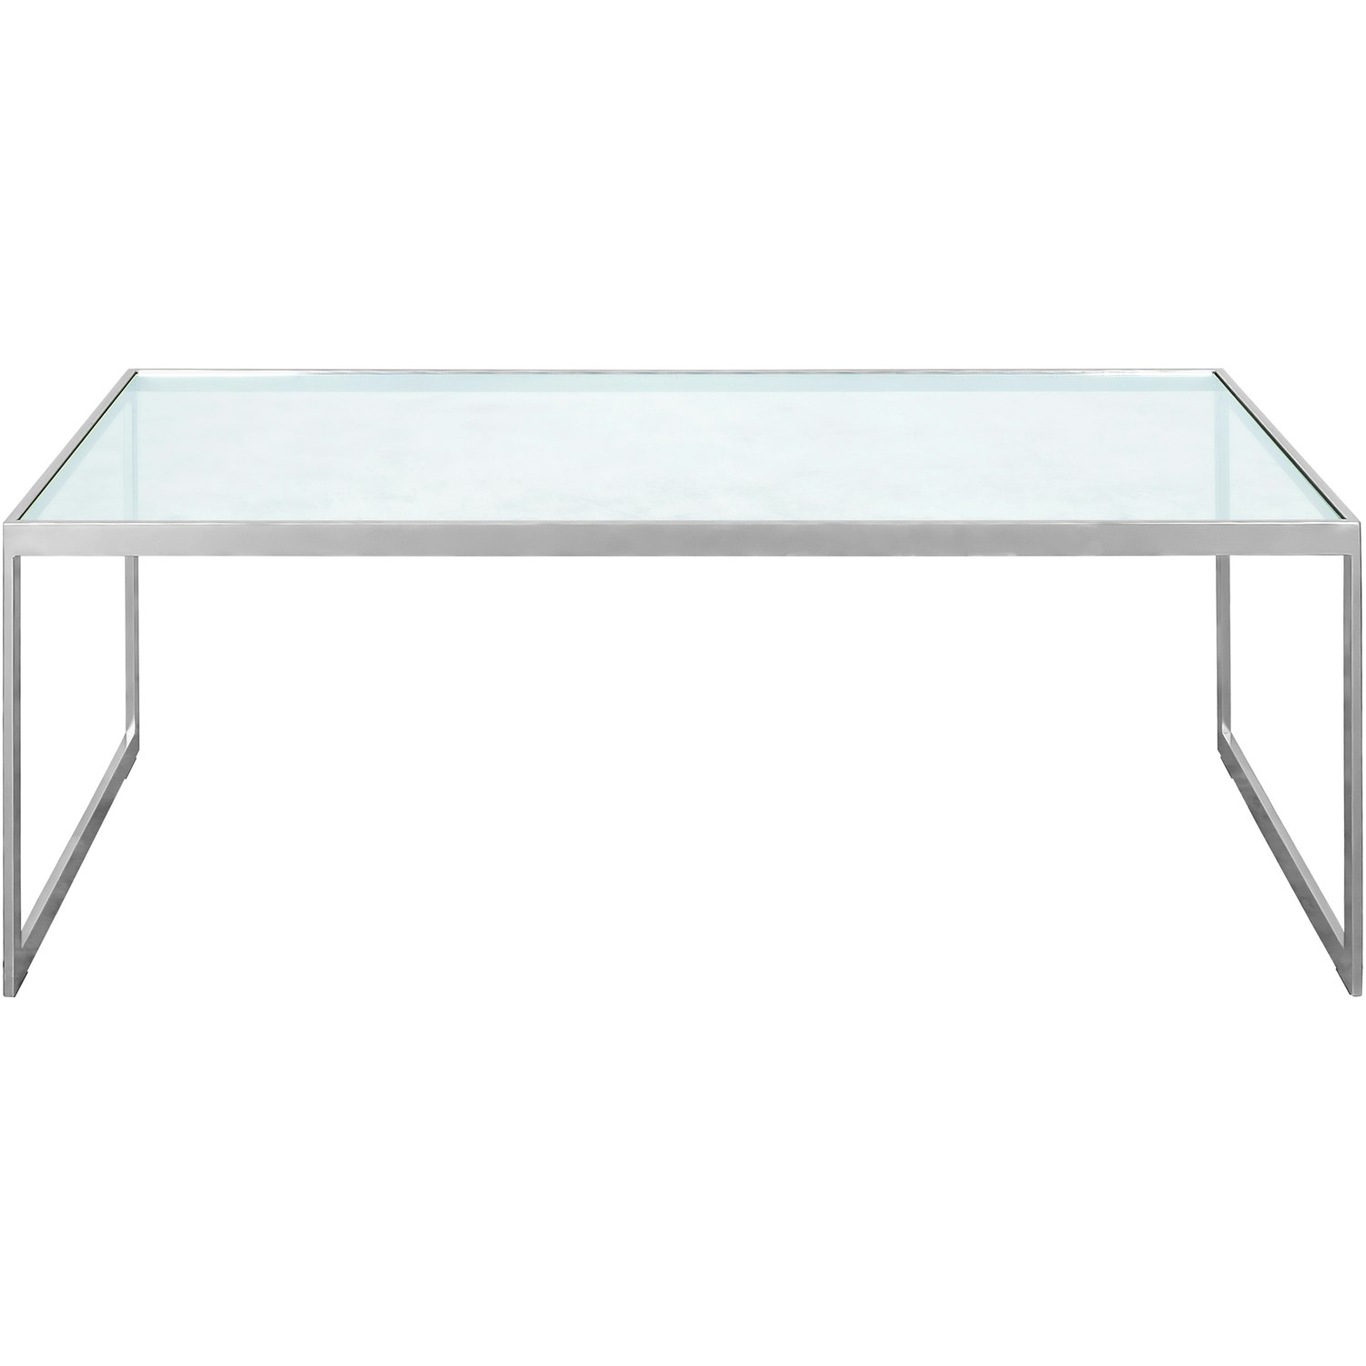 Square Coffee Table, 122x62 cm, Silver Grey/Glass